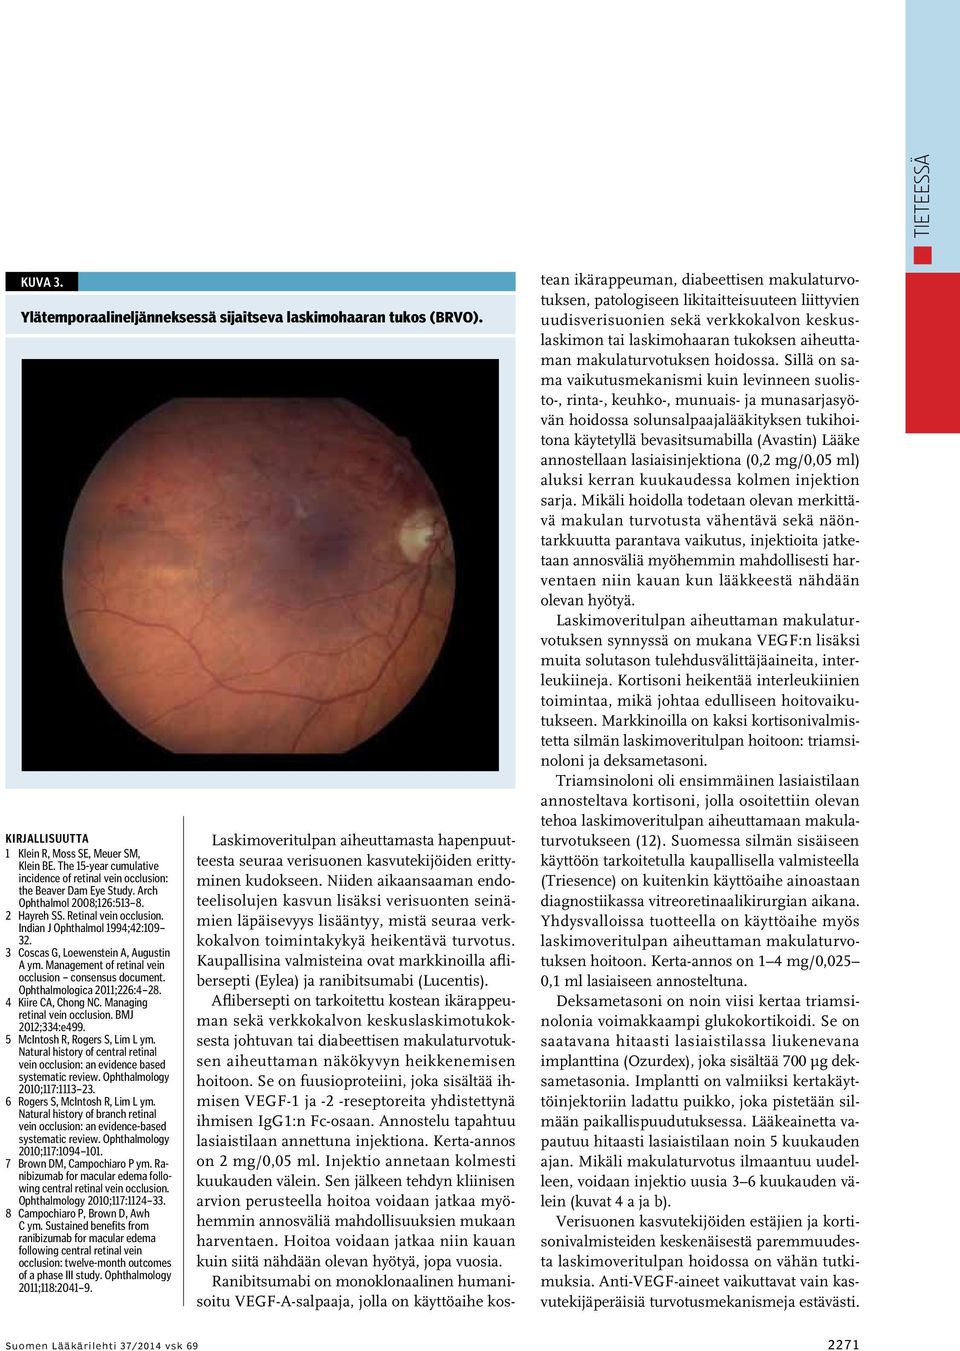 3 Coscas G, Loewenstein A, Augustin A ym. Management of retinal vein occlusion consensus document. Ophthalmologica 2011;226:4 28. 4 Kiire CA, Chong NC. Managing retinal vein occlusion.